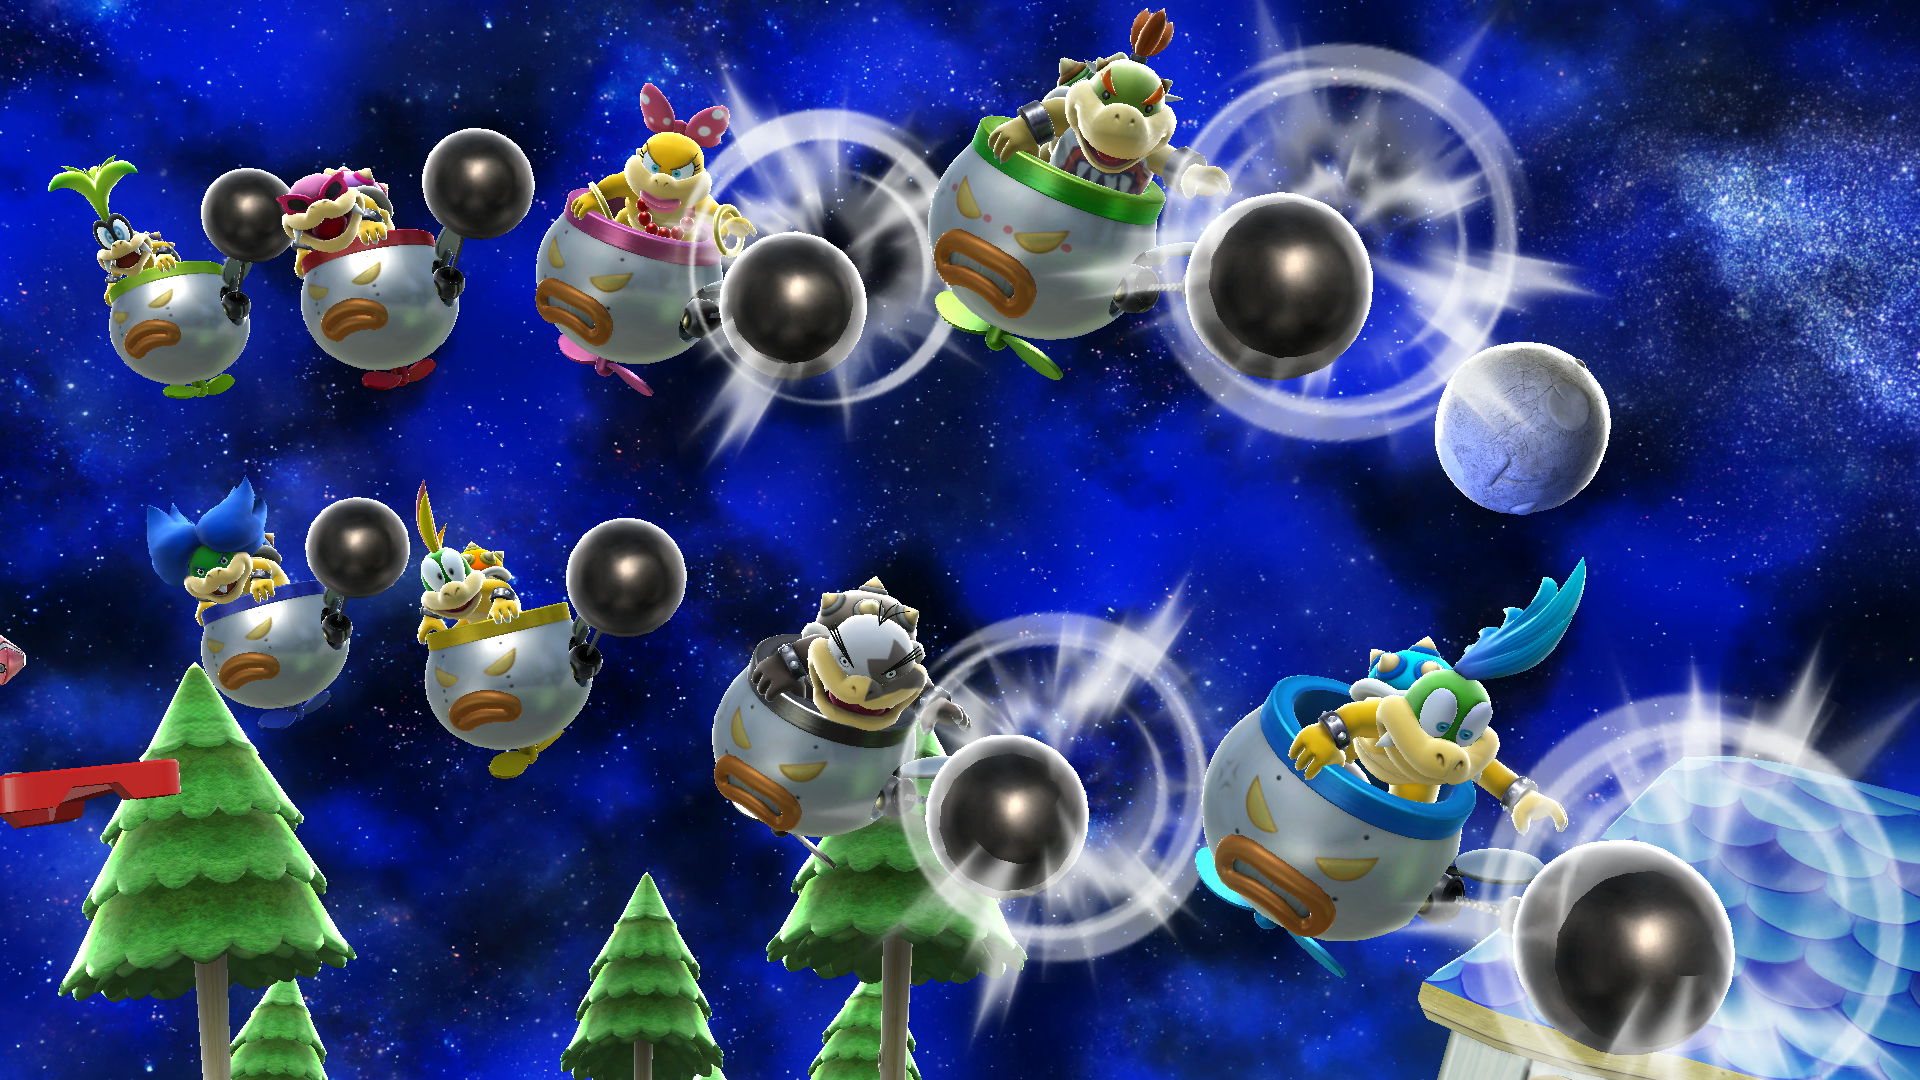 There, I made sure I got every Koopaling in at least one picture.